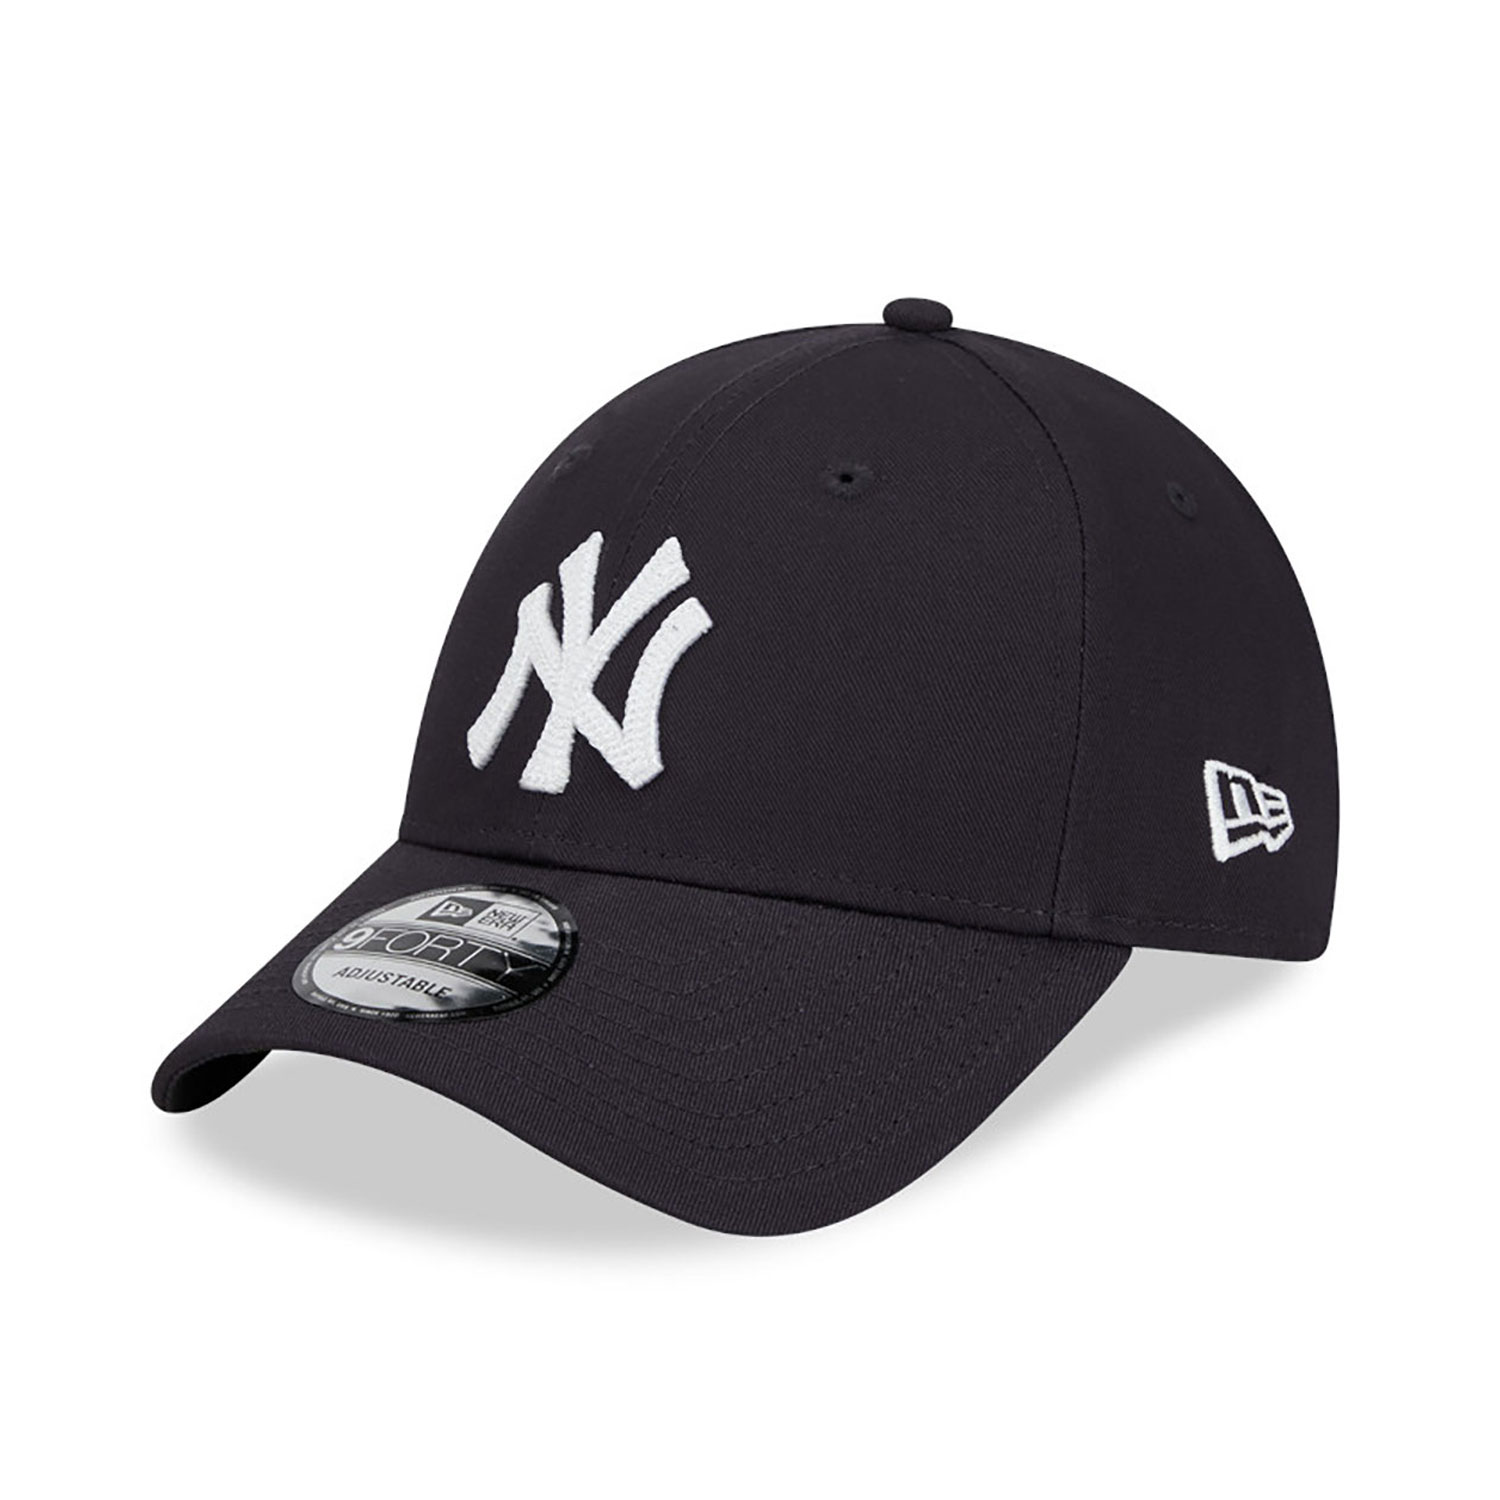 New York Yankees New Traditions Navy 9FORTY Adjustable Cap